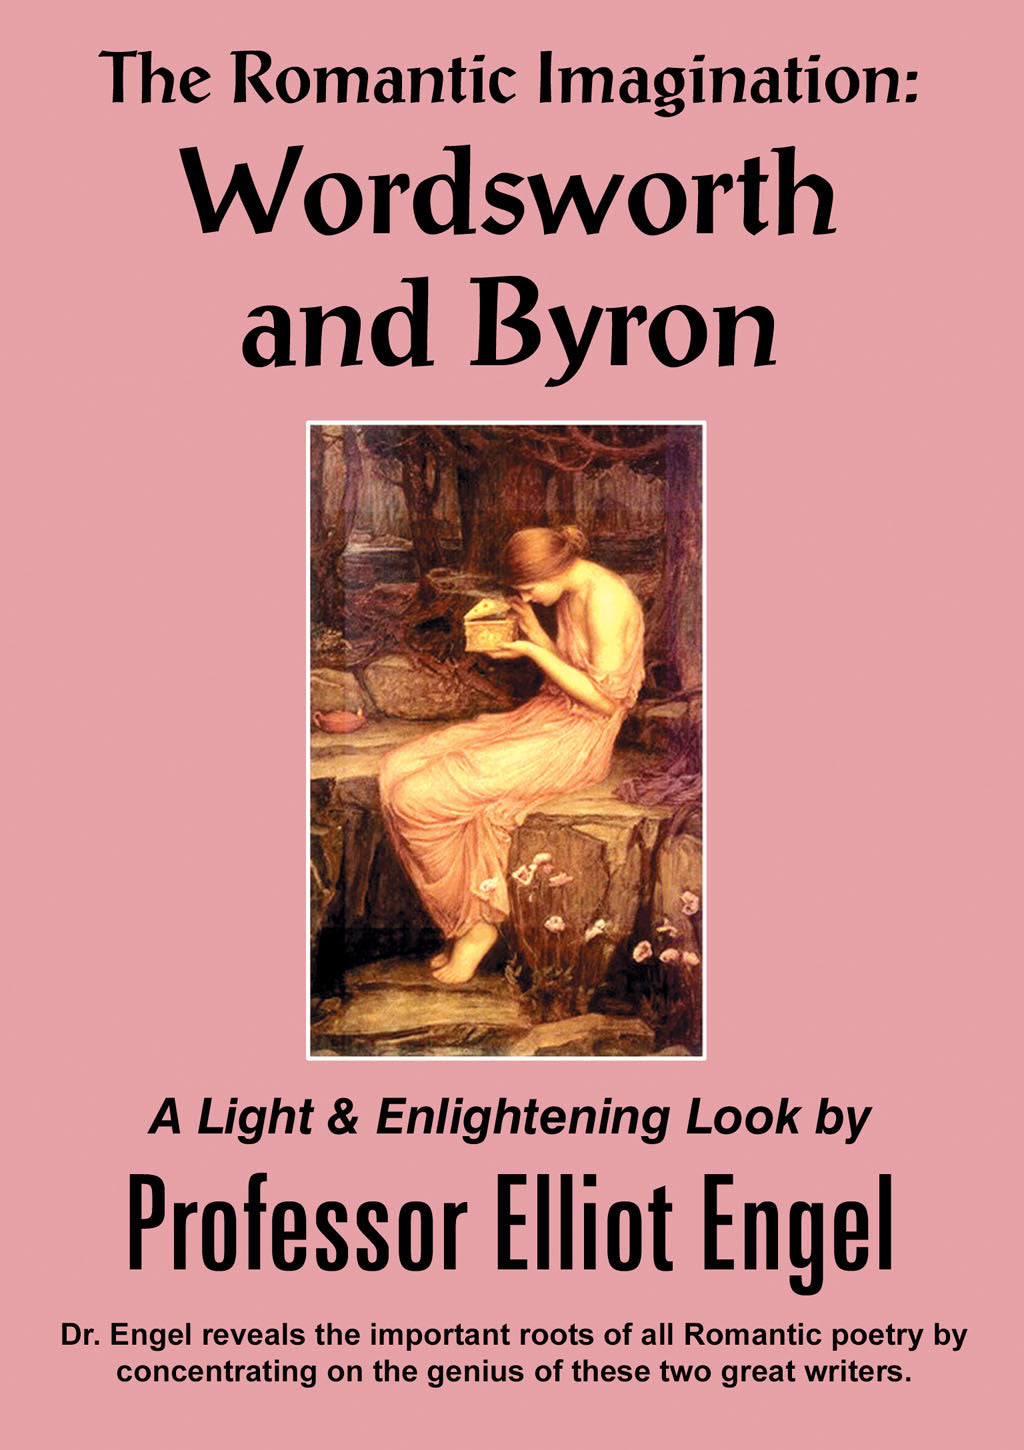 CD19 The Romantic Imagination: Wordsworth and Byron